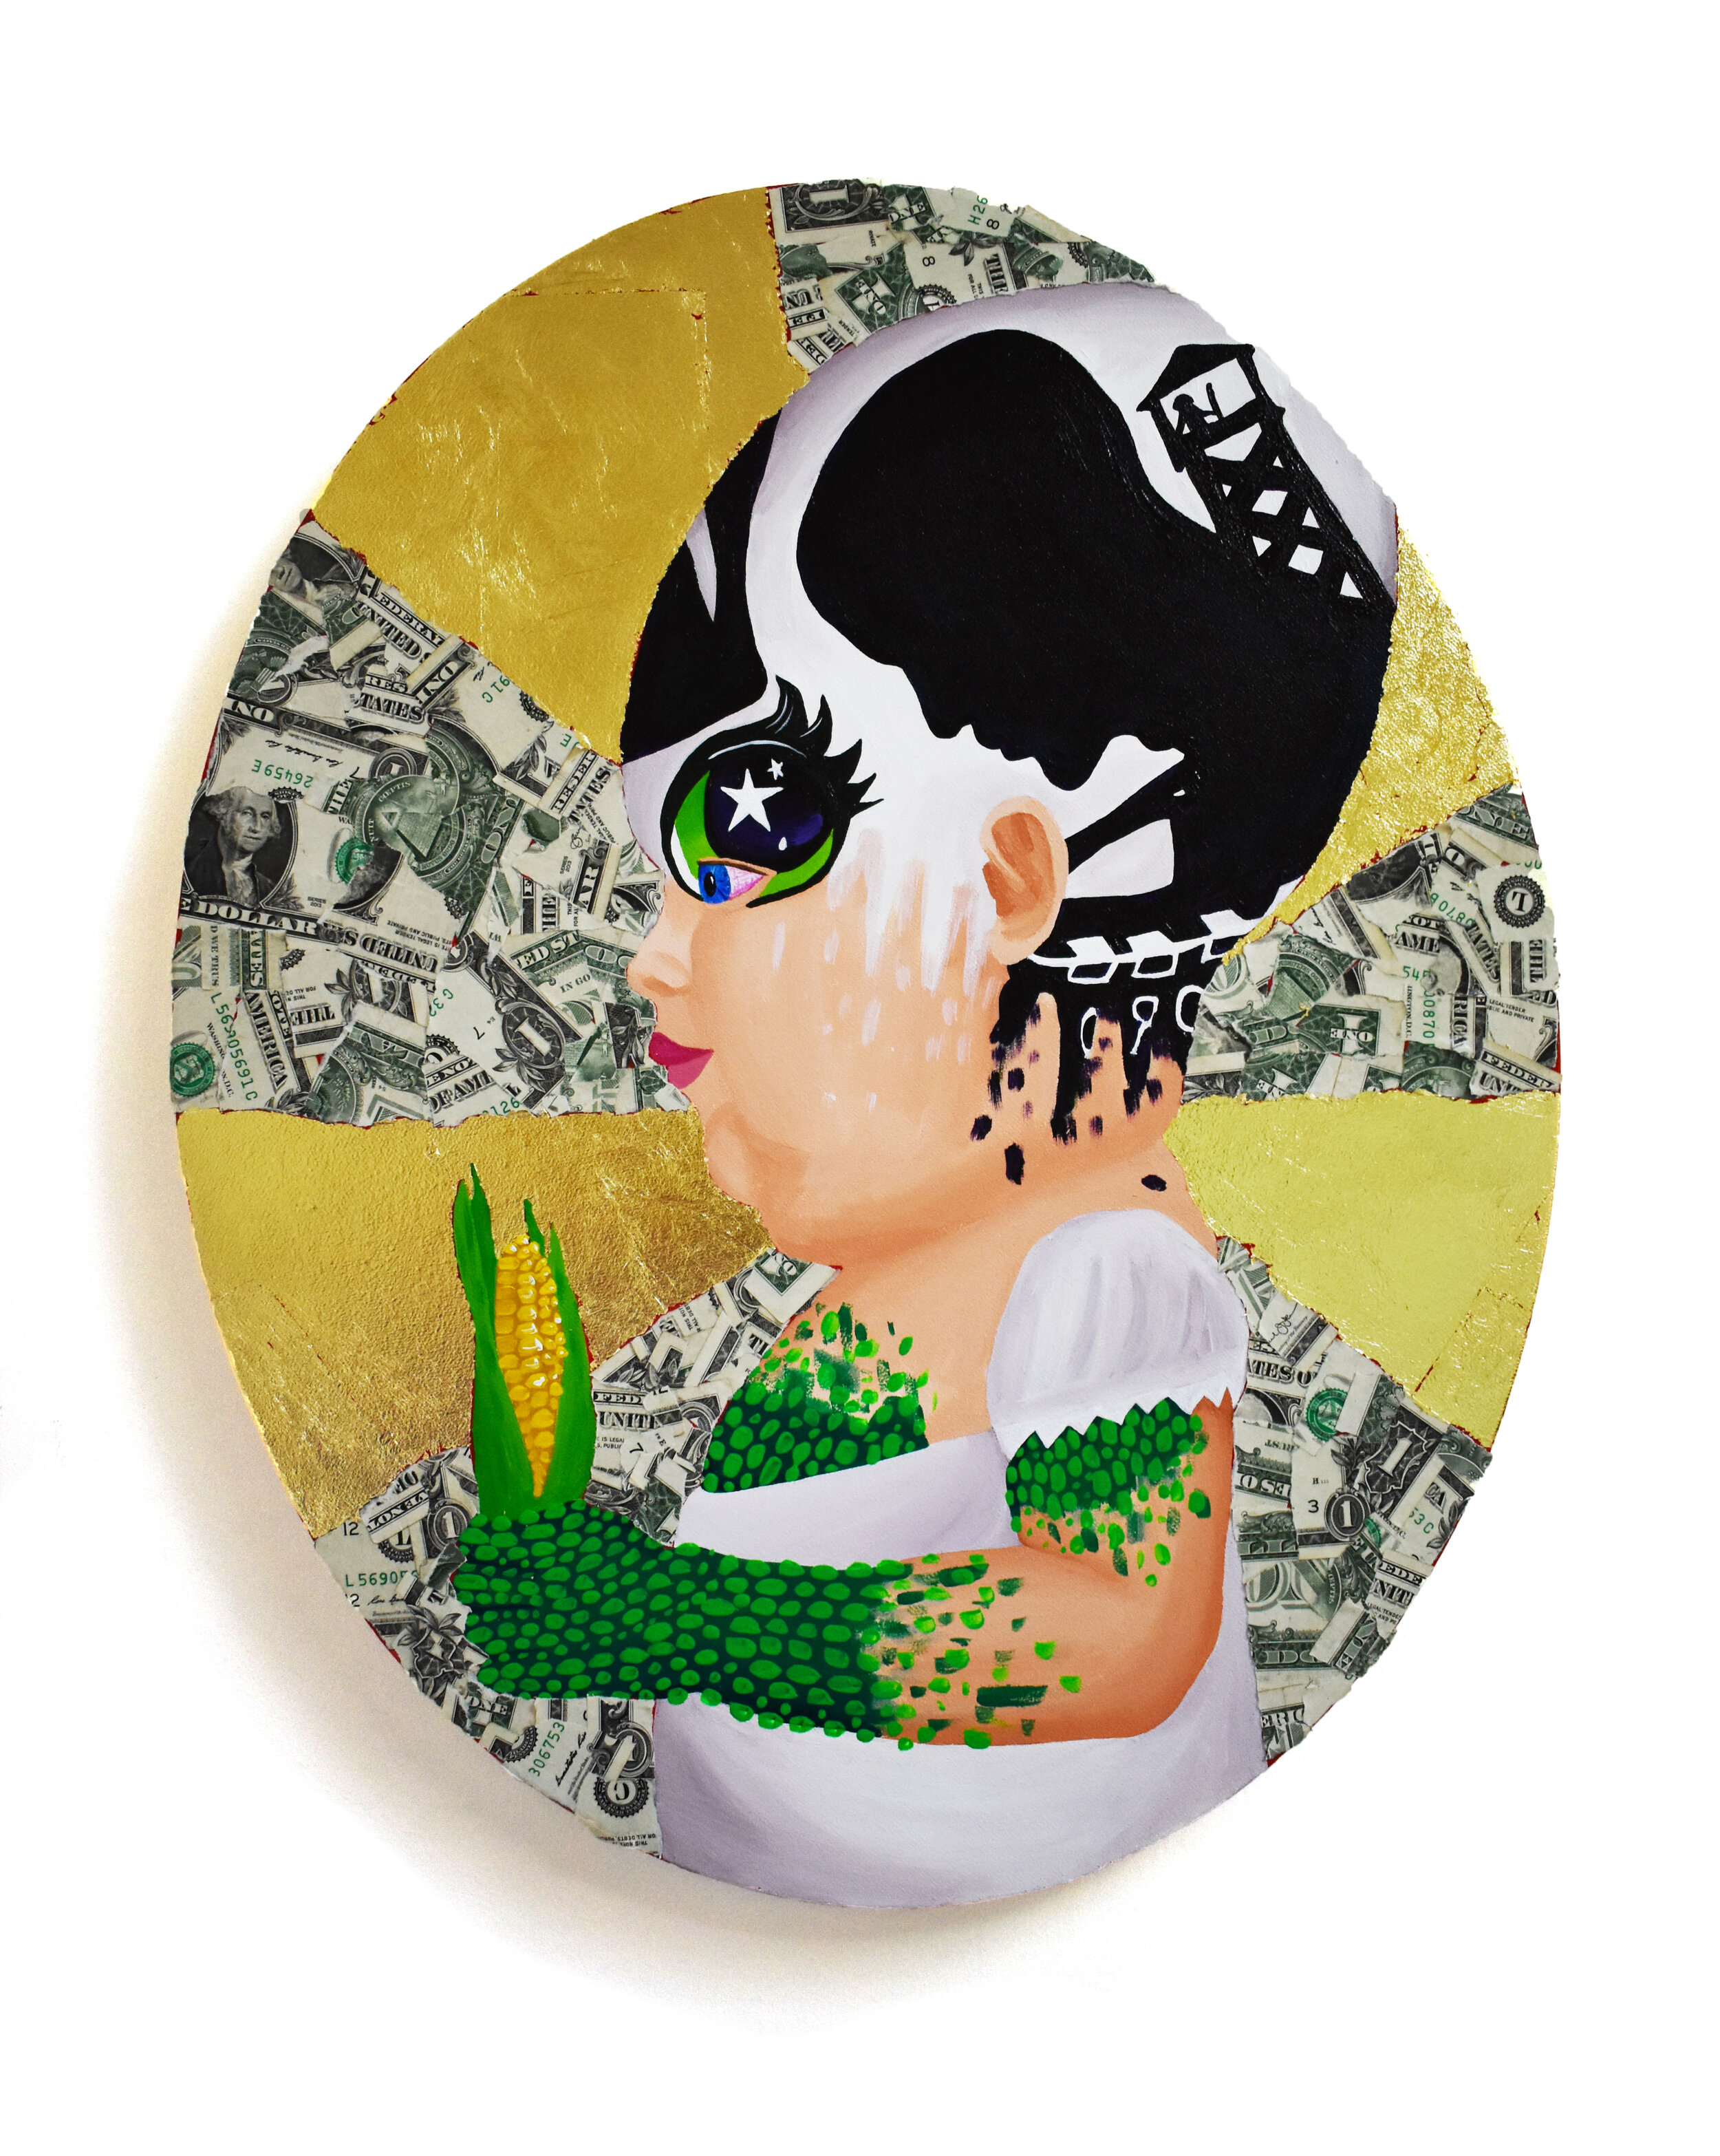   Cornfield Canaries , 2019  16 x 20 inches (oval) (40.64 x 50.8 cm.)  Acrylic, gold leaf, and American dollar bills on canvas  Private collection, Zürich 